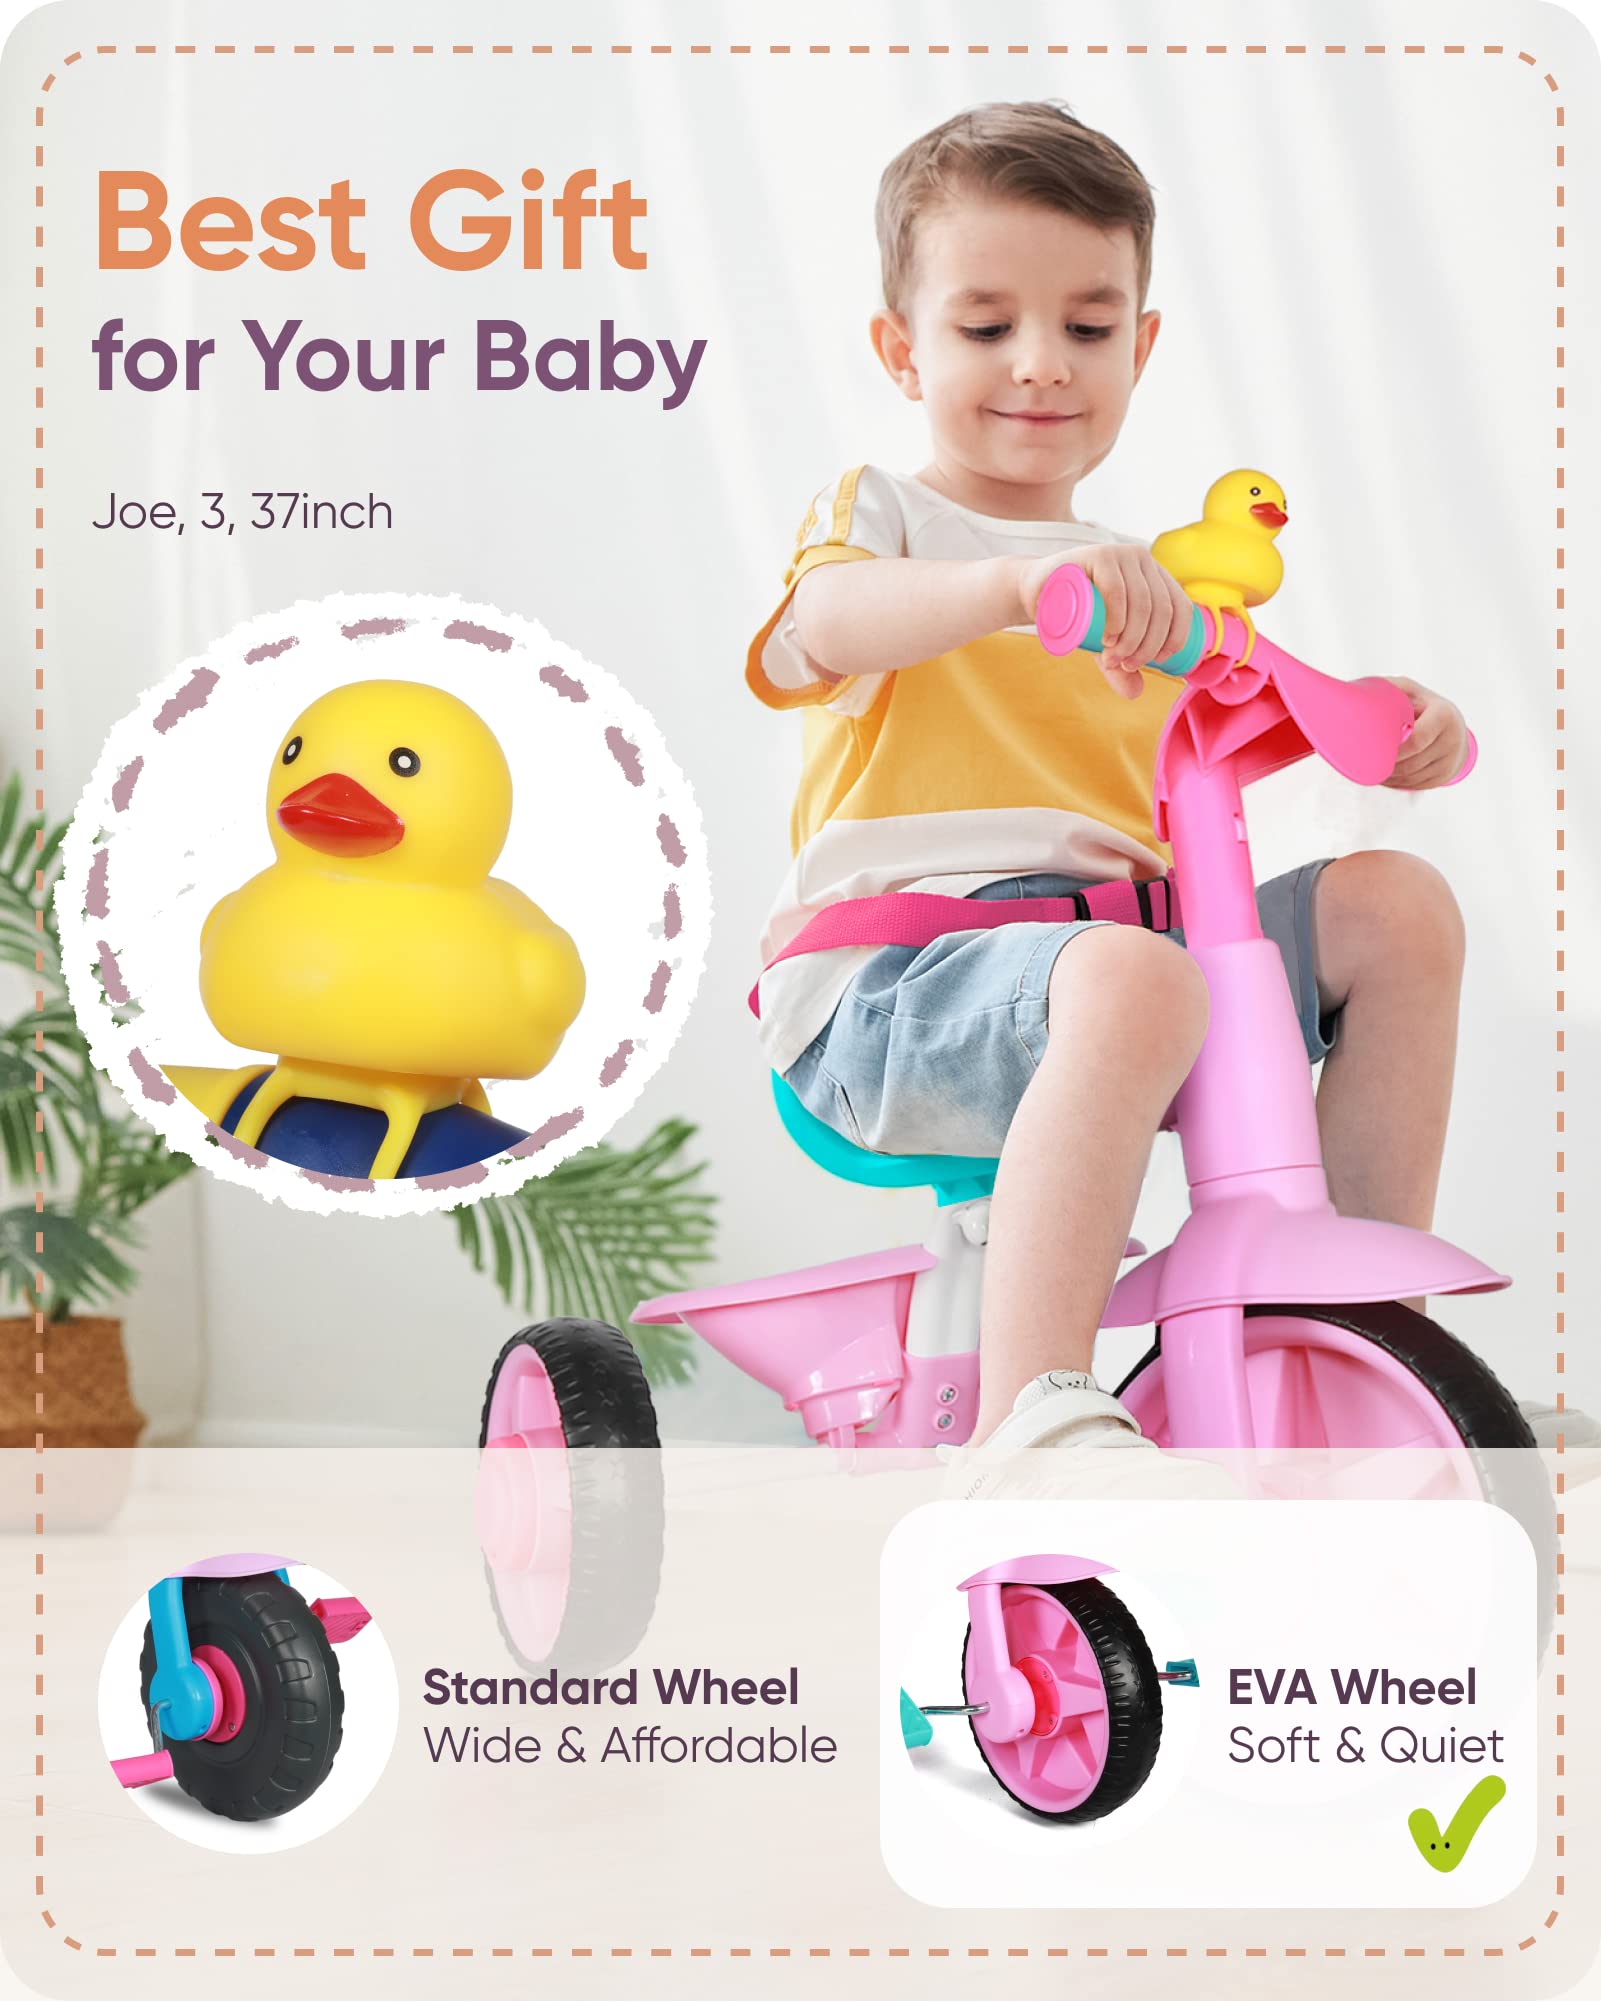 KRIDDO 2 in 1 Kids Tricycles Age 18 Month to 3 Years, EVA Wheels Upgraded Trikes Gift for Toddlers 2 to 3 Year Old with Push Handle and Duck Bell, Pink